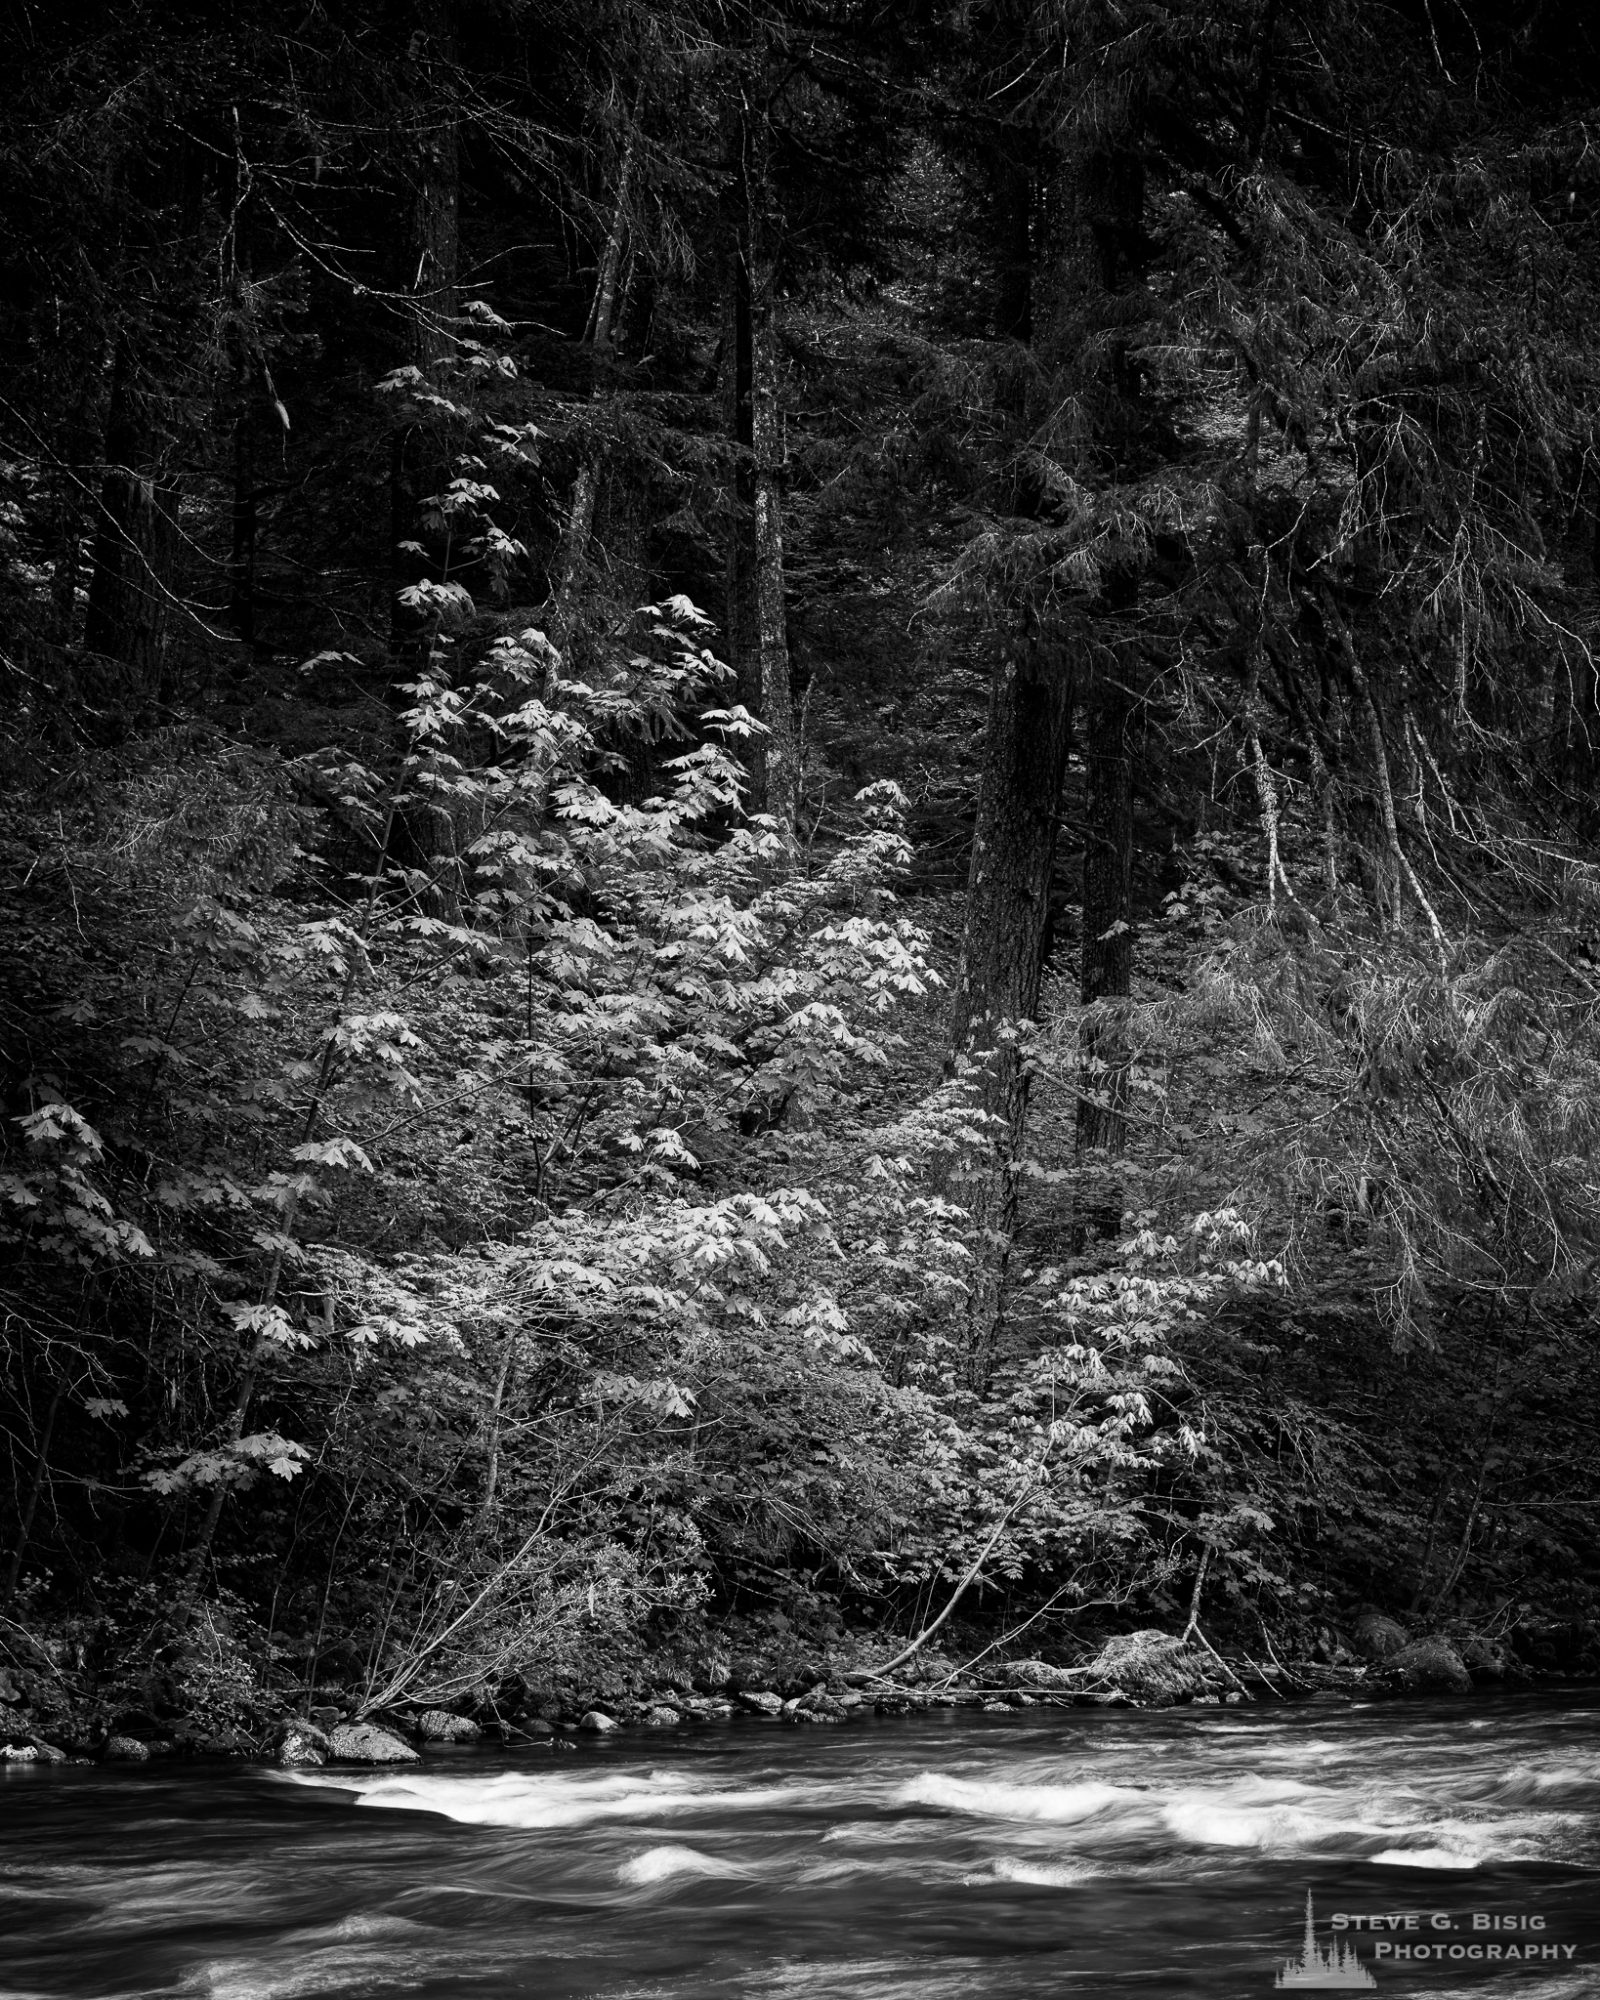 A black and white landscape photograph of the forested banks of a creek found along Forest Road 52 (Skate Creek Road) in the Gifford Pinchot National Forest, Washington.